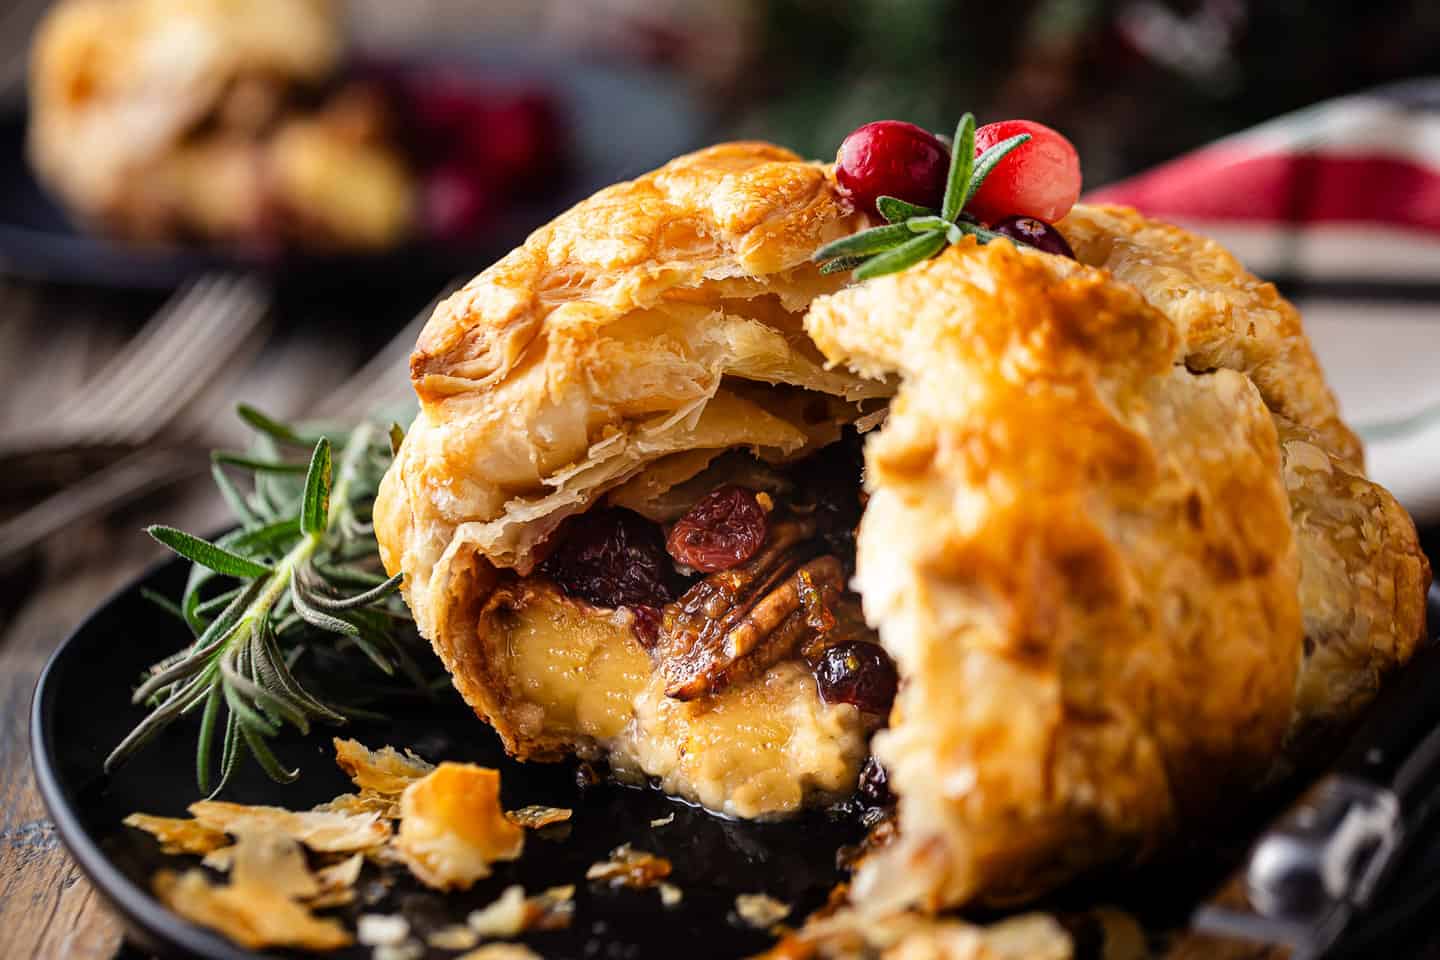 Baked brie puff pastry with wintry fruits, nuts, and herbs.